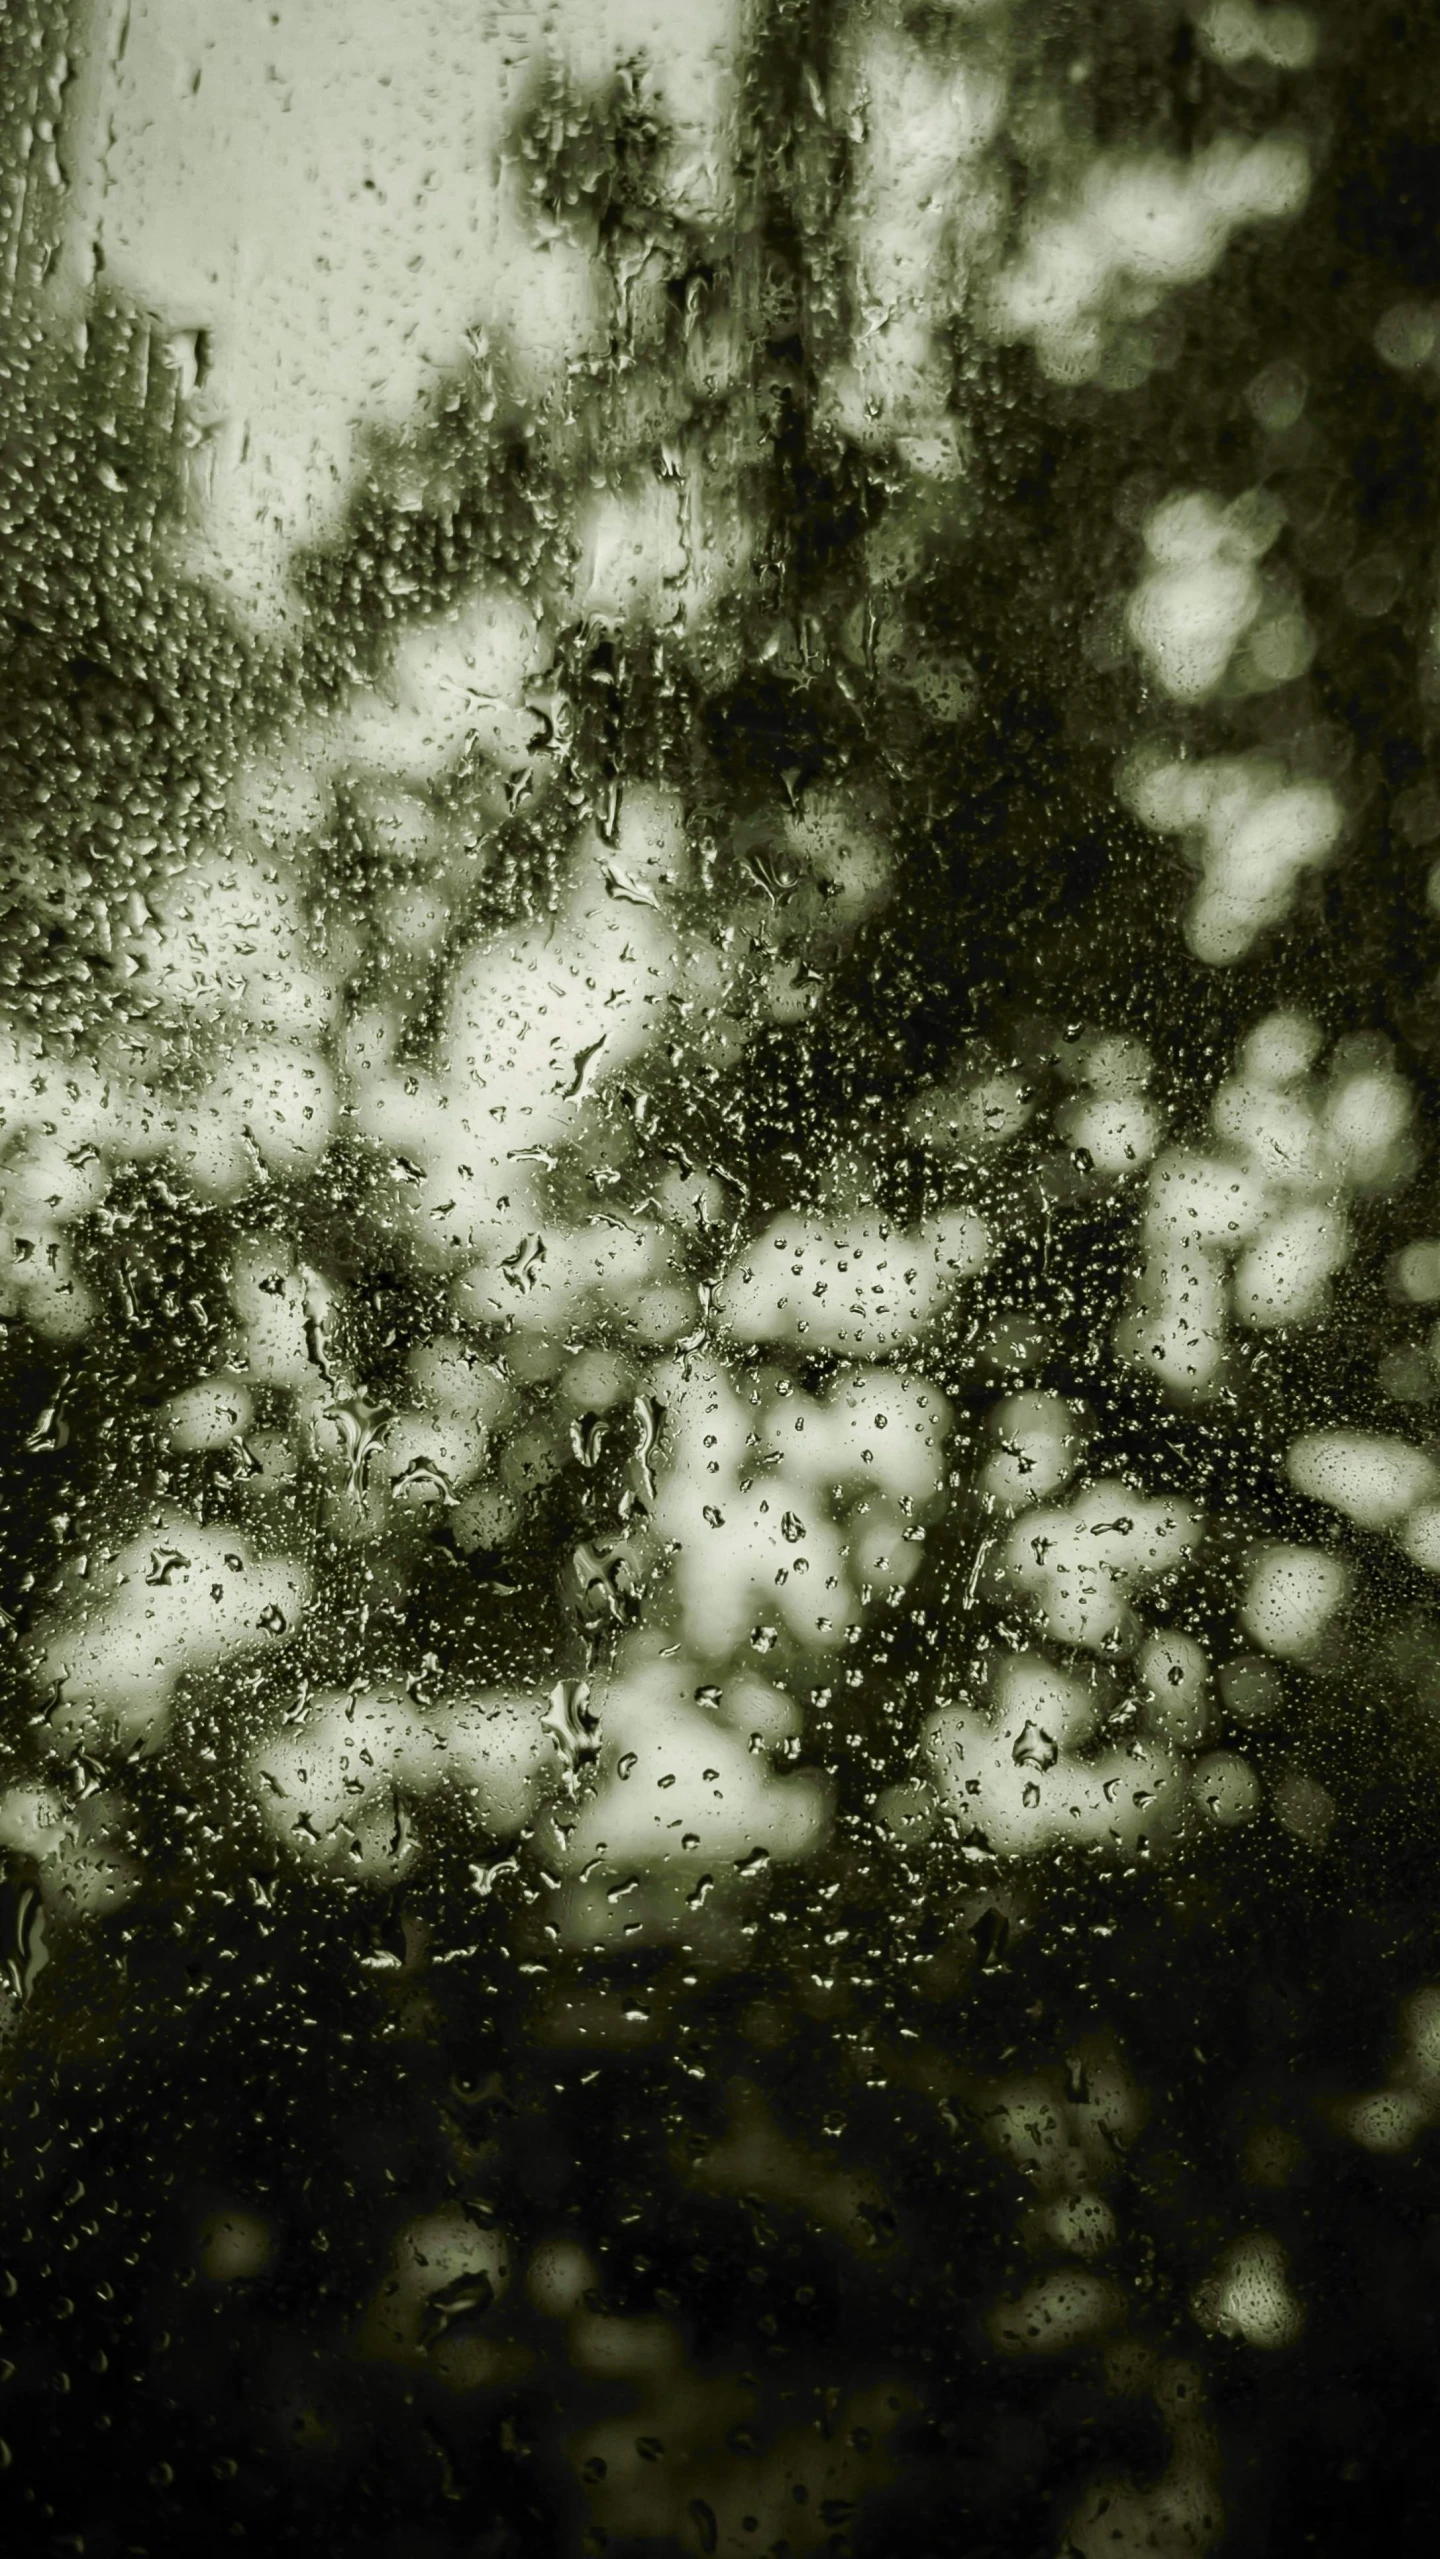 this is rain that has fallen down on the window of a car